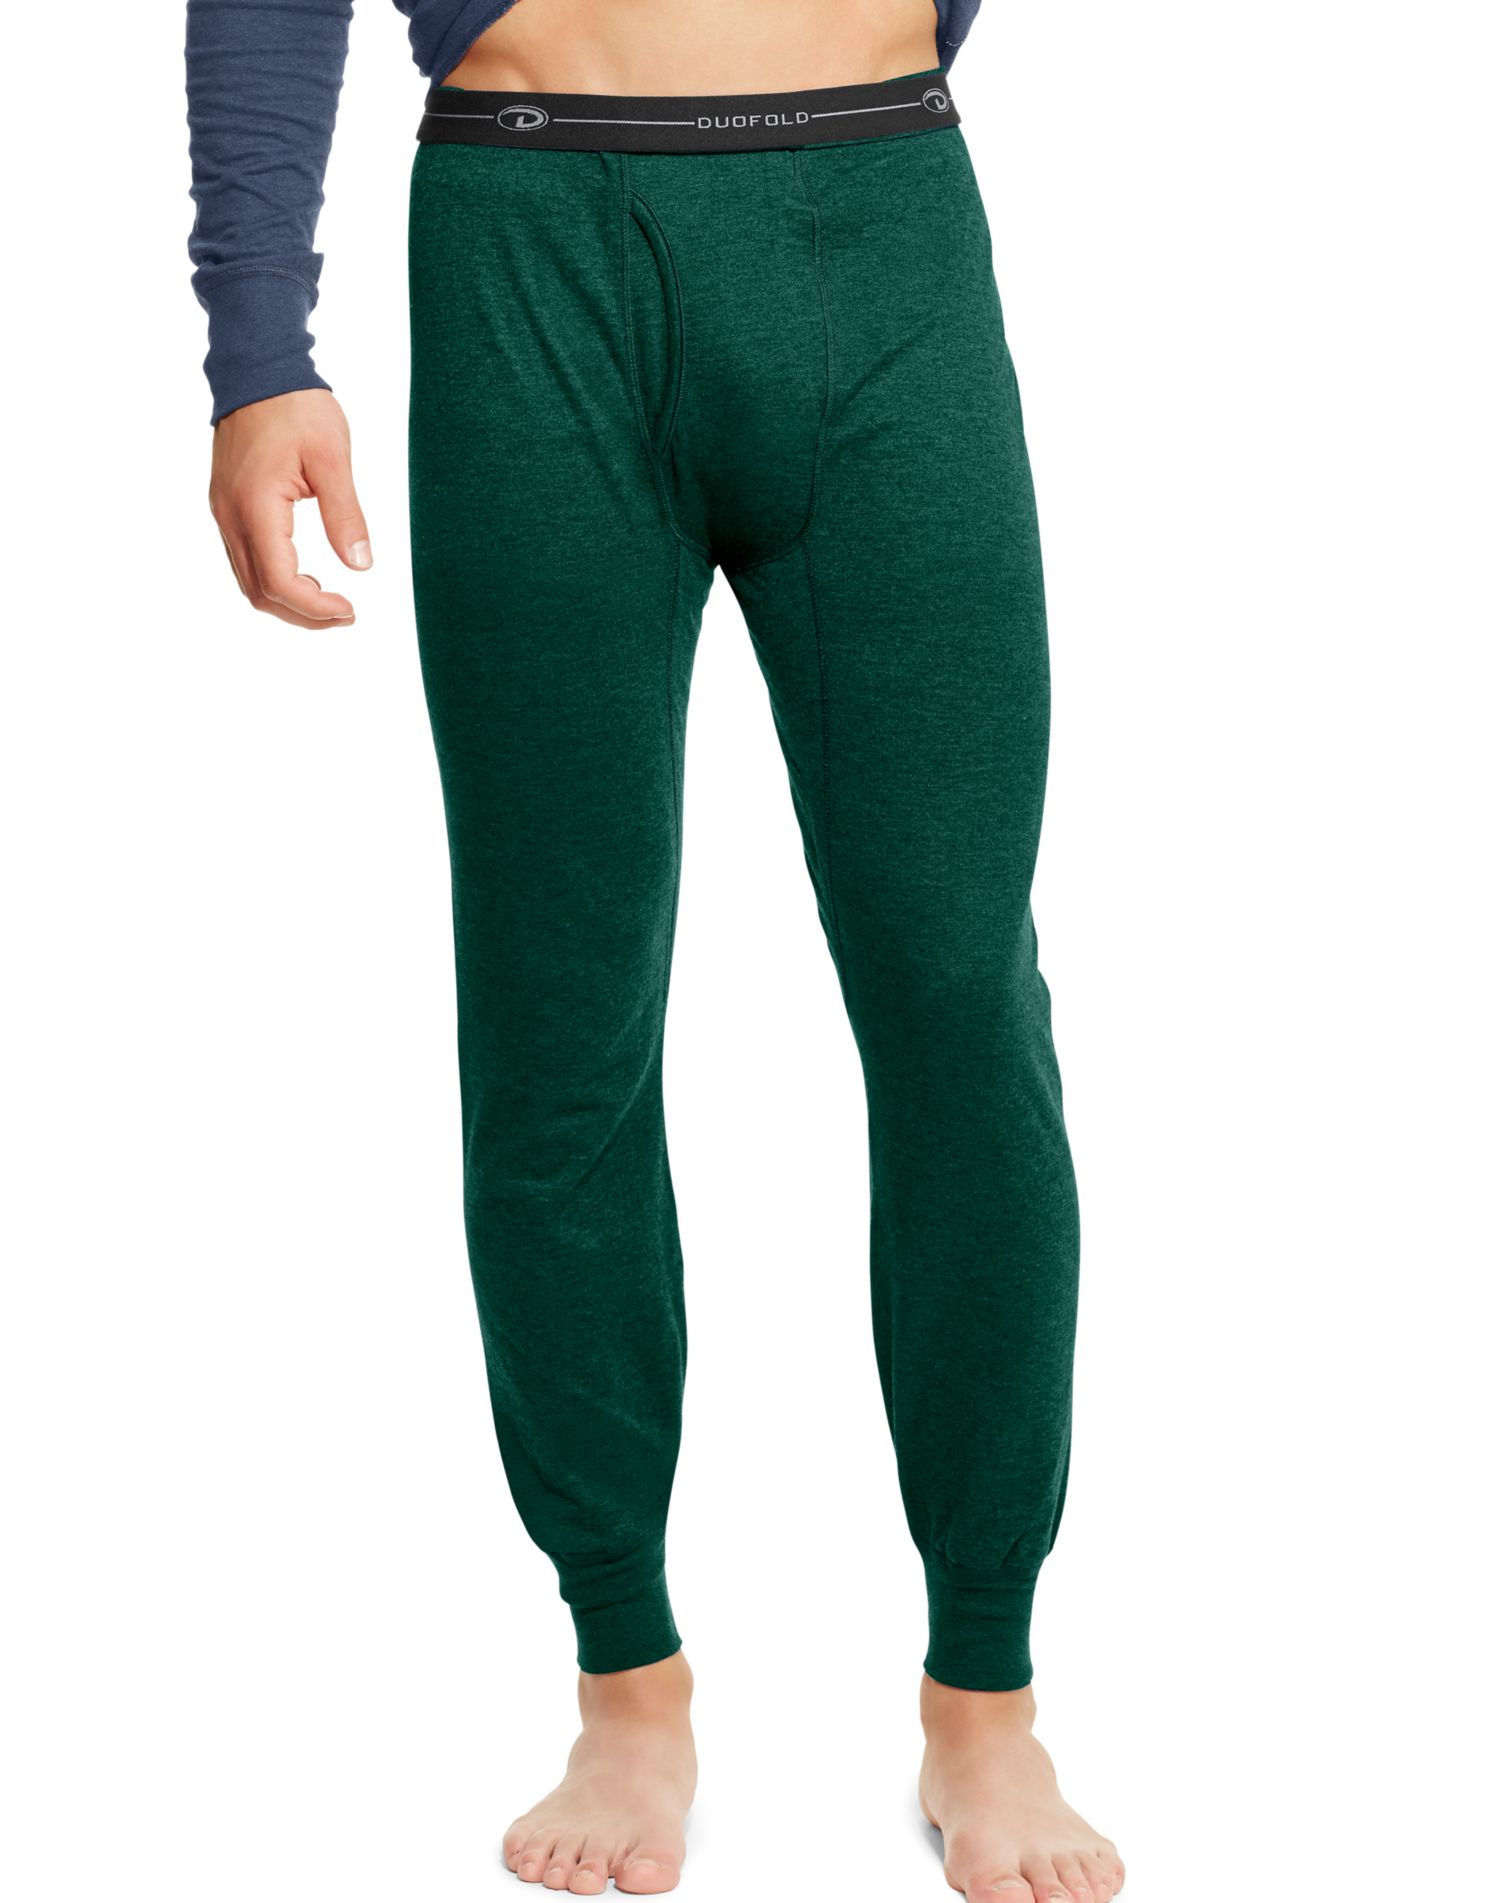 Duofold by Champion Mens Originals Thermal Pants - Apparel Direct  Distributor